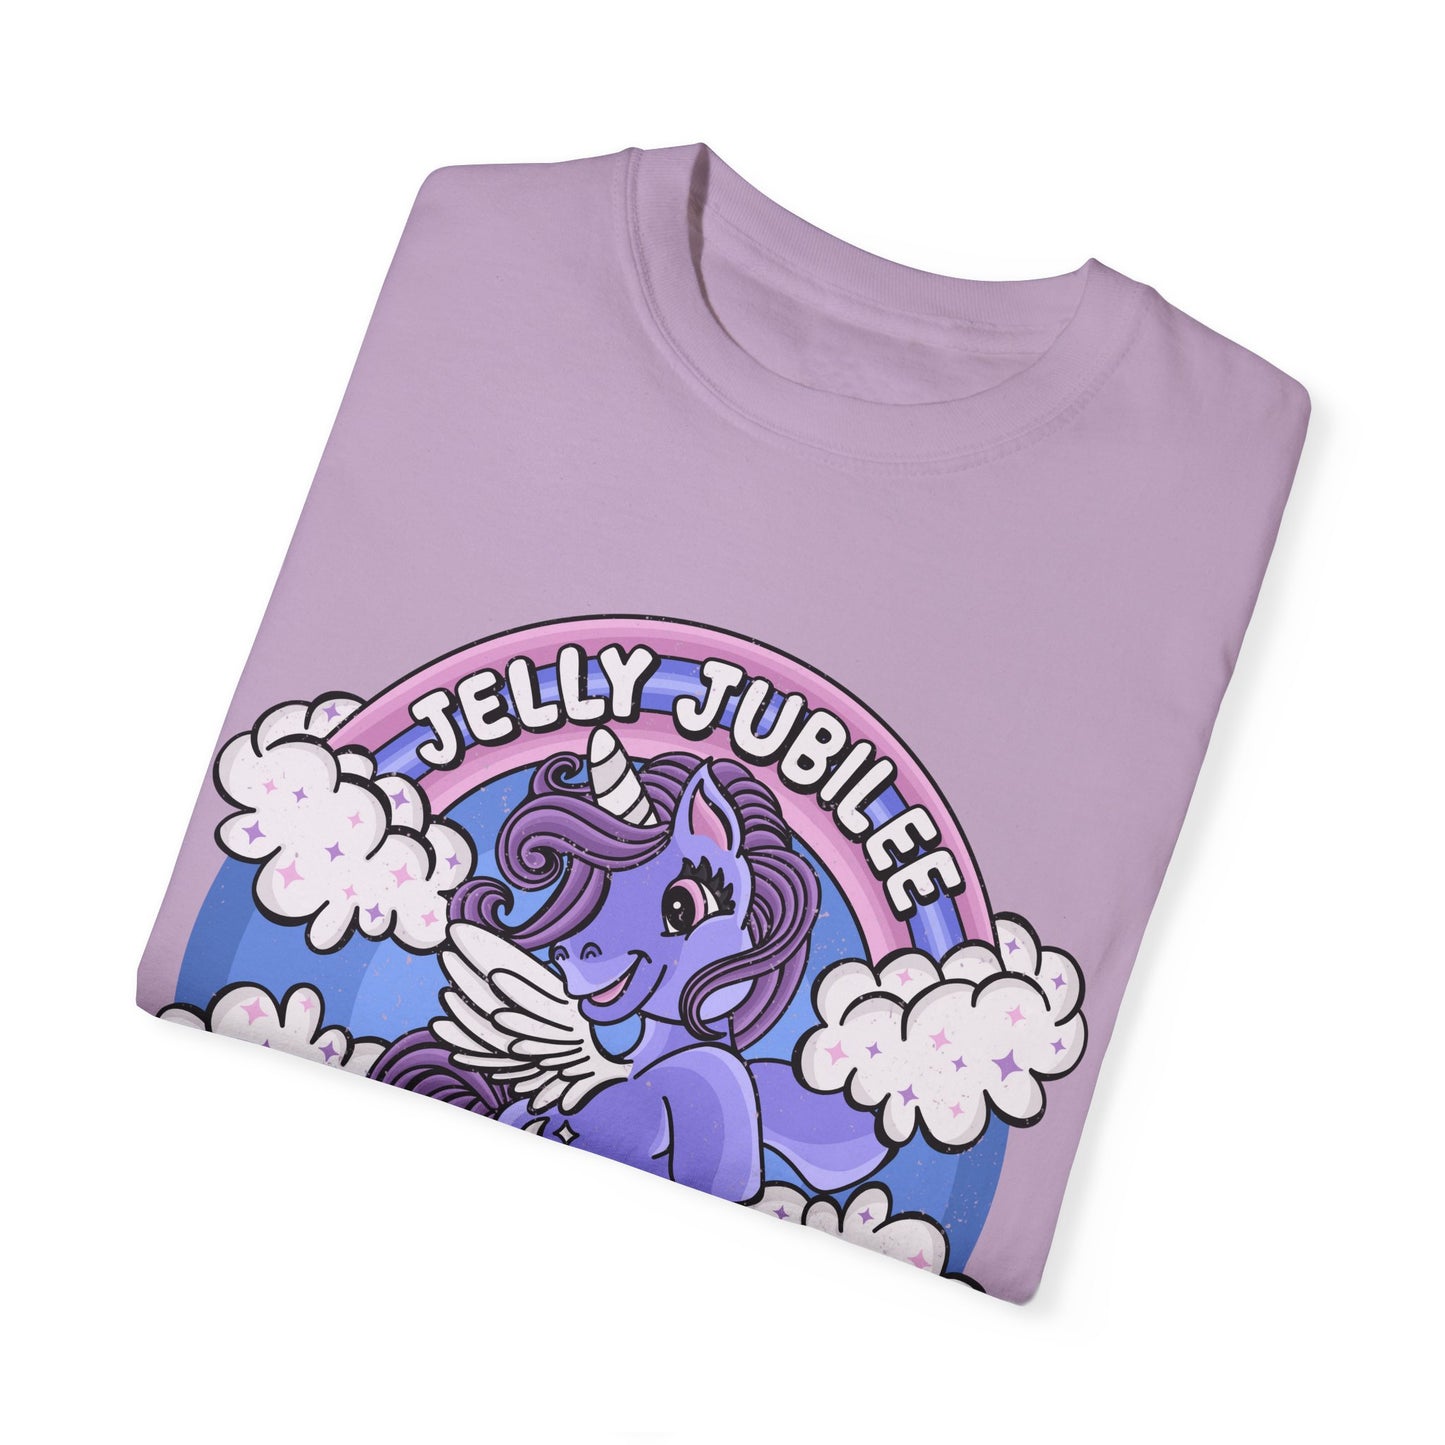 Jelly Jubilee | Licensed Crescent City Comfort Colors Tshirt